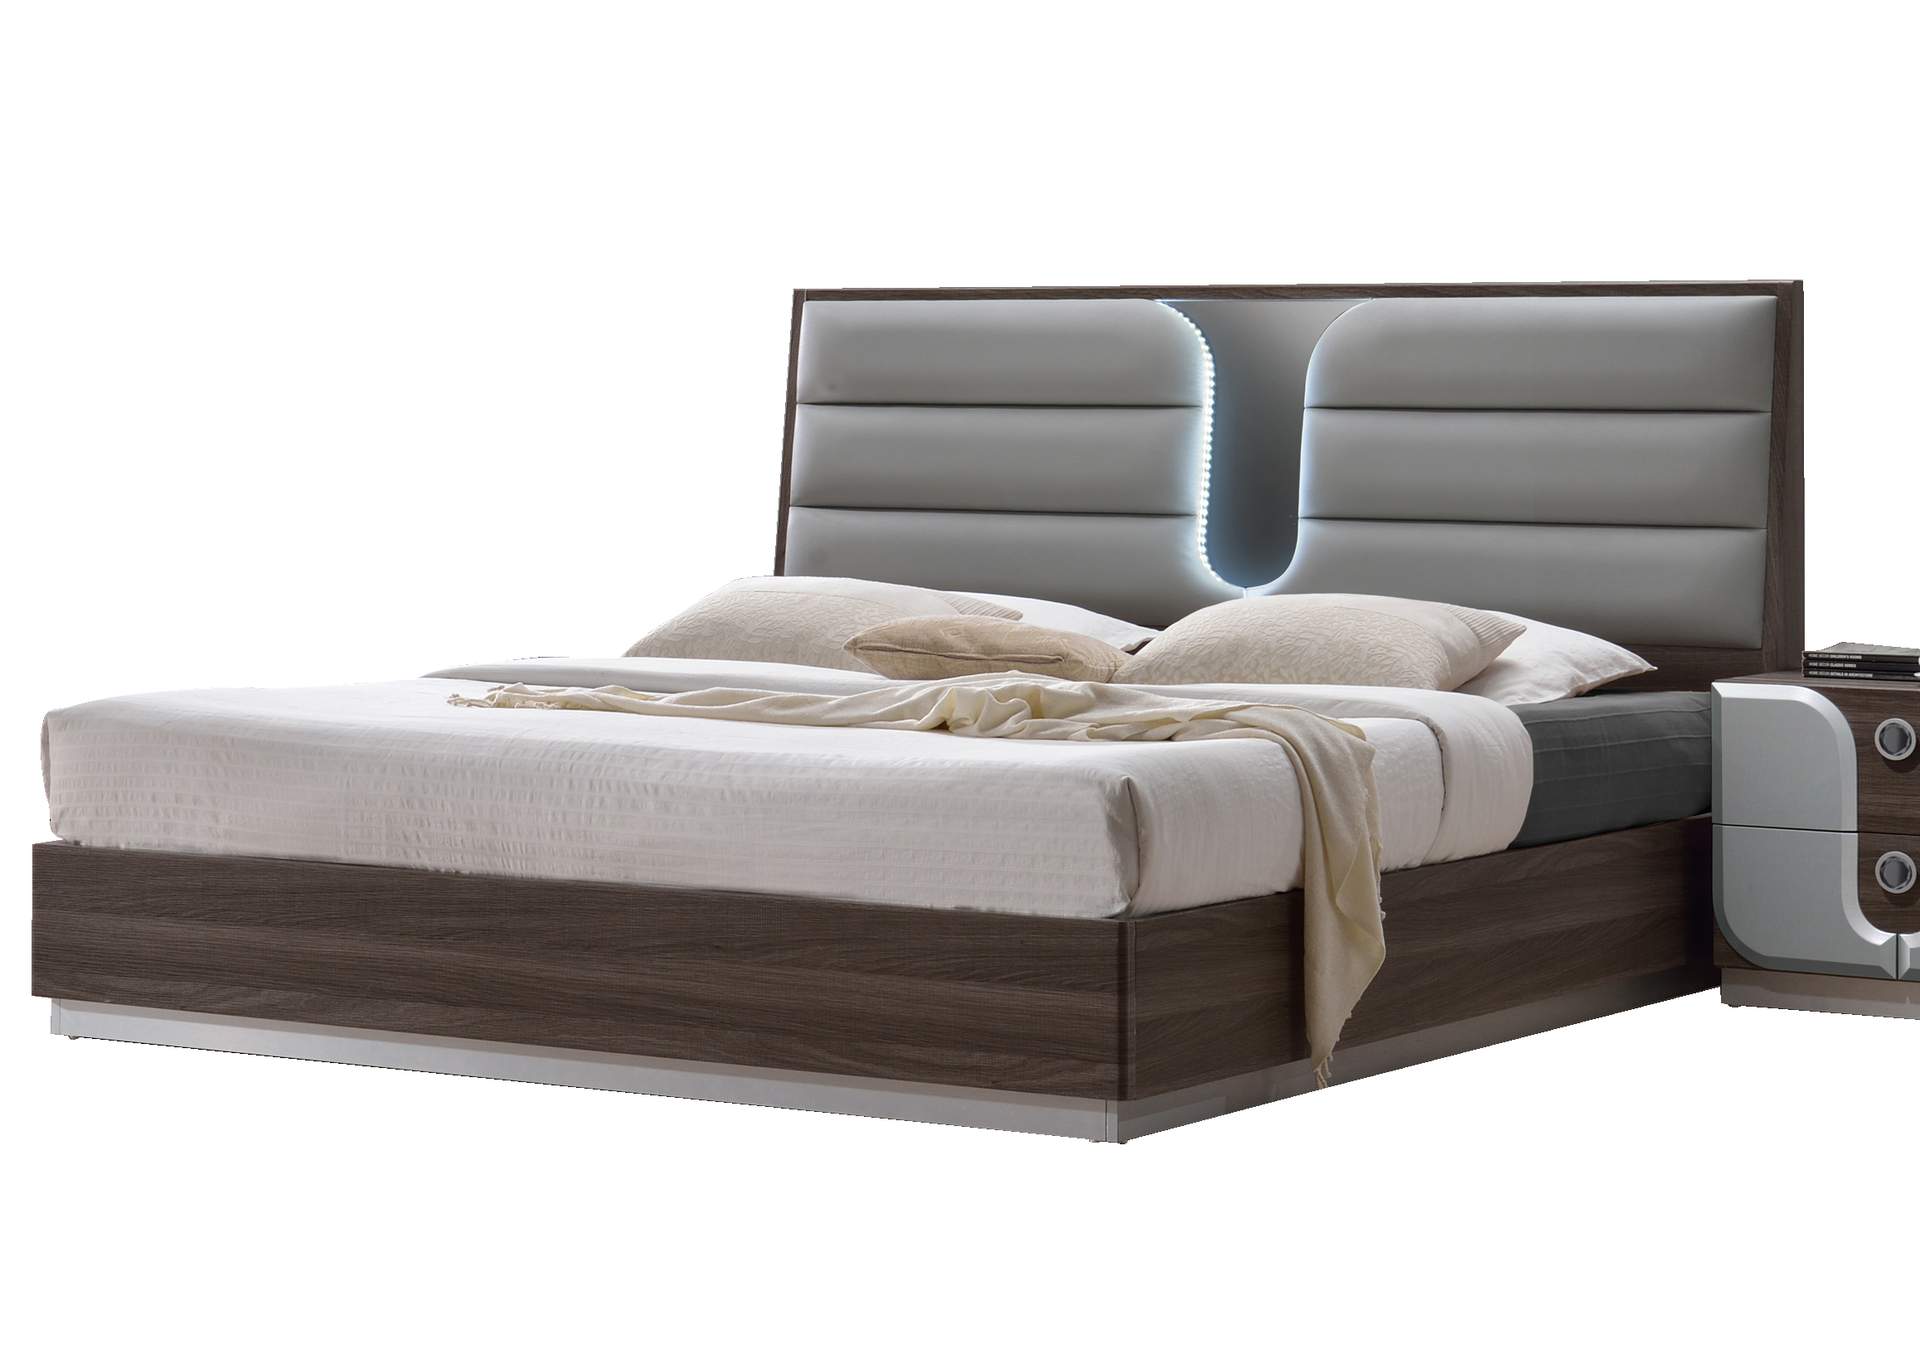 Modern King Size Bed,Chintaly Imports